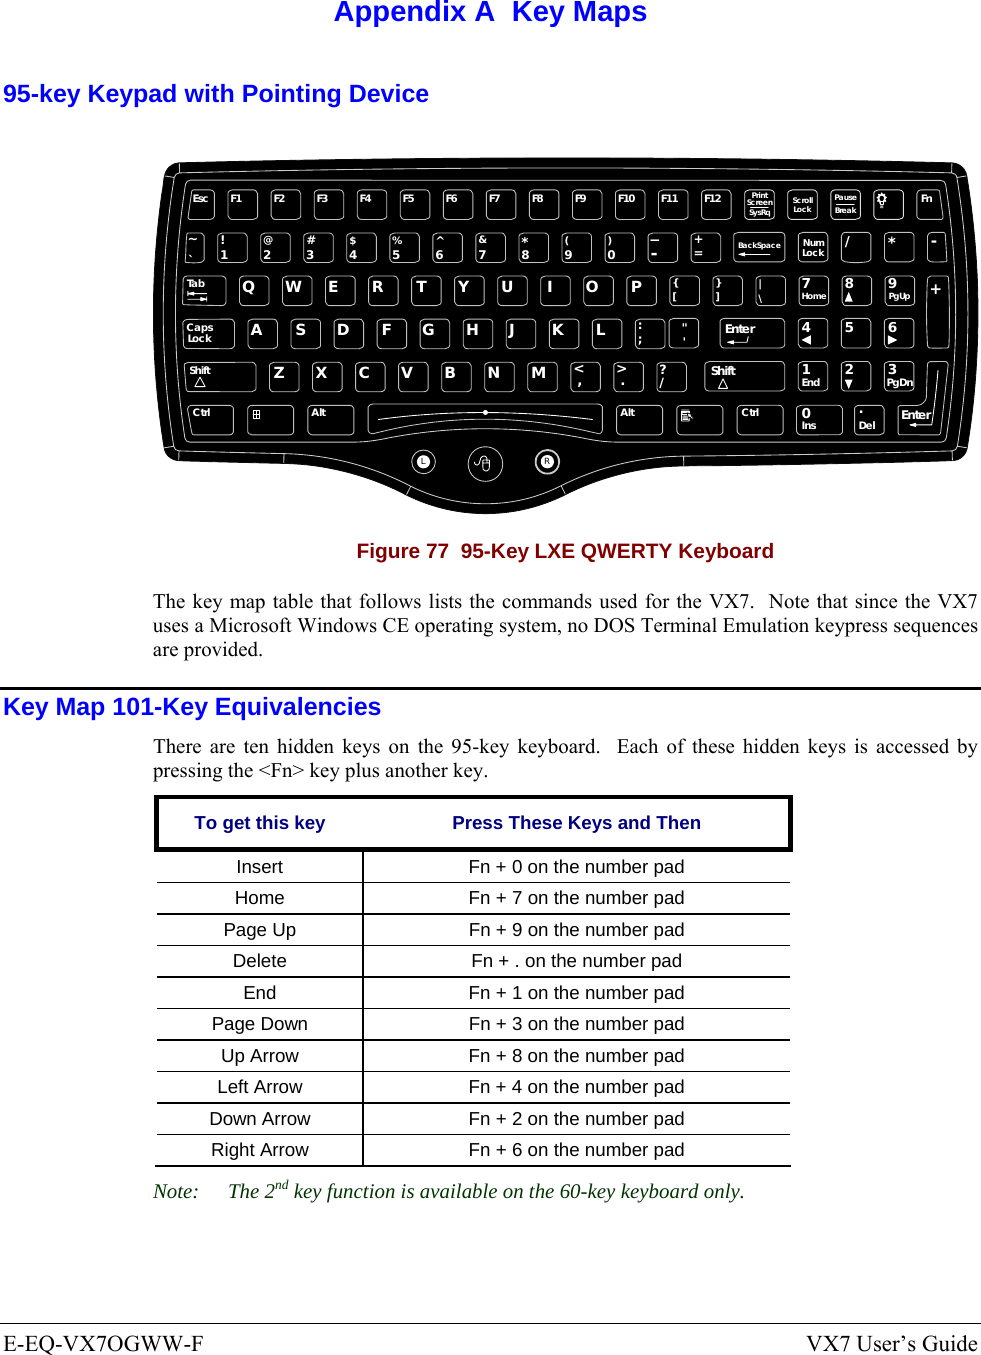  E-EQ-VX7OGWW-F  VX7 User’s Guide  Appendix A  Key Maps 95-key Keypad with Pointing Device Esc F2 F3 F4 F5 F6 F7 F8 F9 F10 F11 F12PrintScreenSysRq ScrollLock PauseBreakFn`1234567890-=BackSpaceNumLock/*-TabQWE R T Y U I OP[]\{}|7894561203Home PgUpCapsASDFGHJKL;&apos;:&quot;EnterCtrl AltXCVBNM,./&lt;&gt;?ShiftAlt Ctrl InsEnd PgDn+~!@#$%^&amp;*()_+LockShiftZLREnter.DelF1 Figure 77  95-Key LXE QWERTY Keyboard The key map table that follows lists the commands used for the VX7.  Note that since the VX7 uses a Microsoft Windows CE operating system, no DOS Terminal Emulation keypress sequences are provided. Key Map 101-Key Equivalencies  There are ten hidden keys on the 95-key keyboard.  Each of these hidden keys is accessed by pressing the &lt;Fn&gt; key plus another key. To get this key  Press These Keys and Then Insert  Fn + 0 on the number pad Home  Fn + 7 on the number pad Page Up  Fn + 9 on the number pad Delete  Fn + . on the number pad End  Fn + 1 on the number pad Page Down  Fn + 3 on the number pad Up Arrow  Fn + 8 on the number pad Left Arrow  Fn + 4 on the number pad Down Arrow  Fn + 2 on the number pad Right Arrow  Fn + 6 on the number pad Note: The 2nd key function is available on the 60-key keyboard only. 